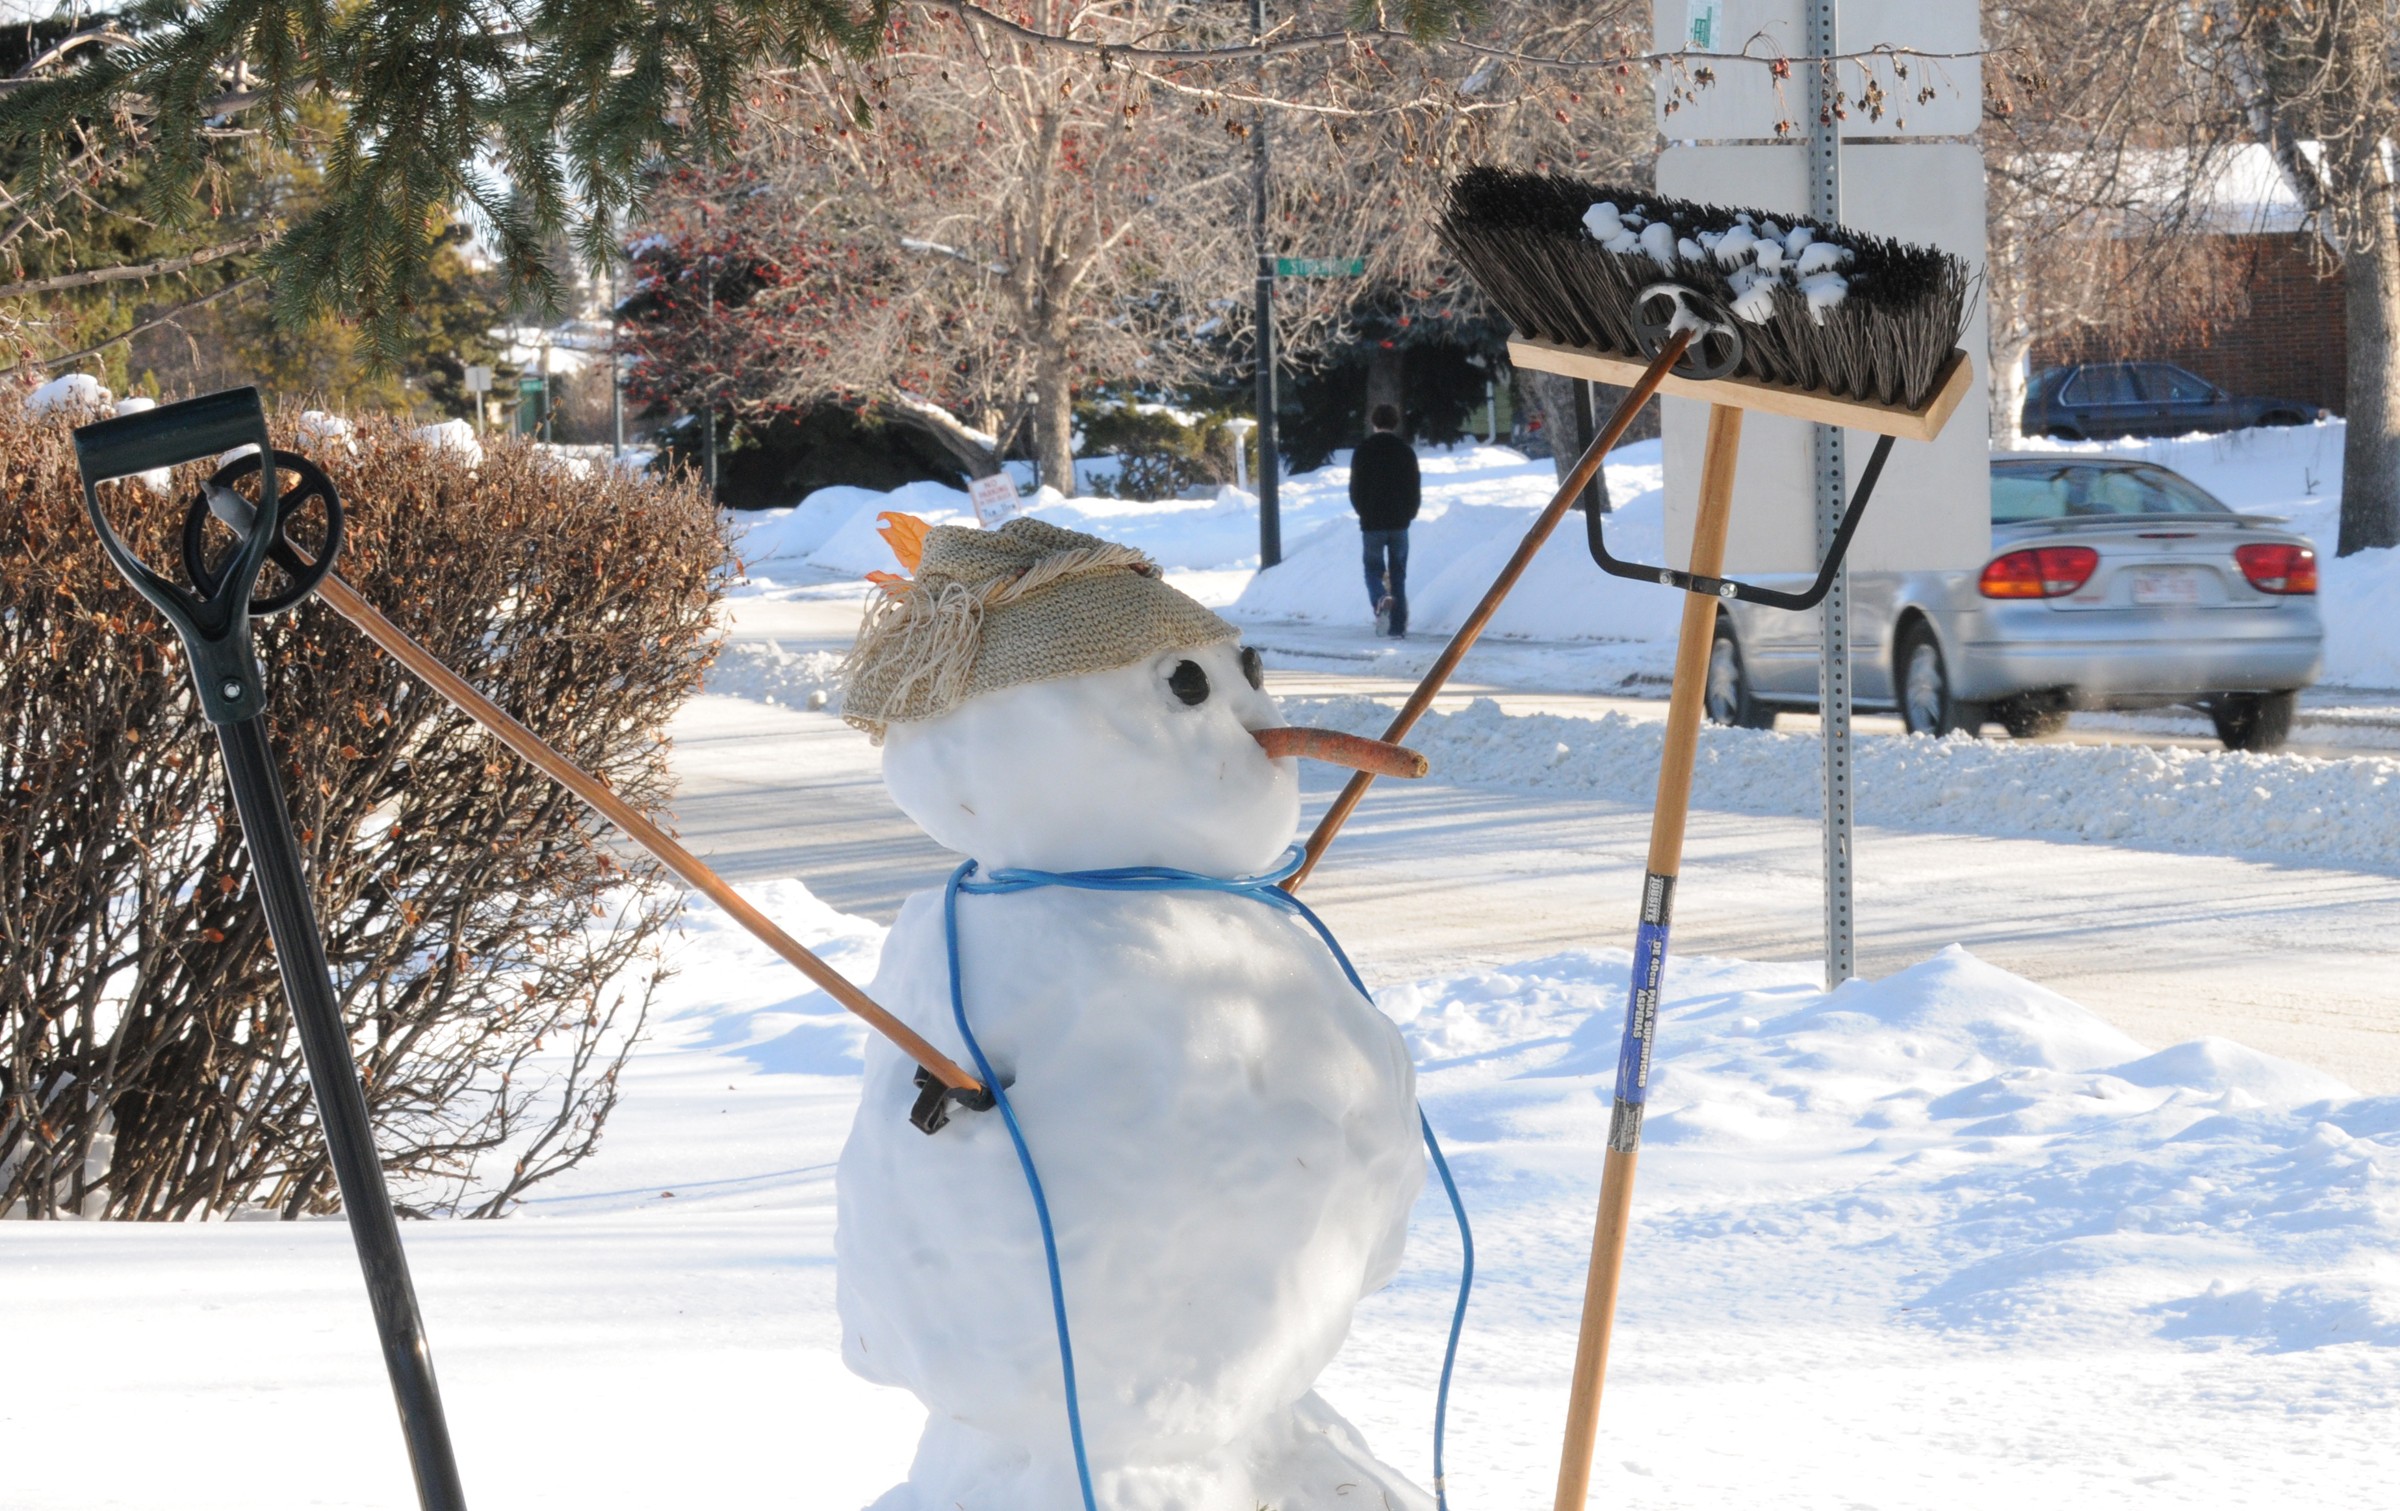 GETTING SUPPORT- A shovel and a broom support two ski poles that were used for a snowman’s arms in the Sunnybrook area of Red Deer